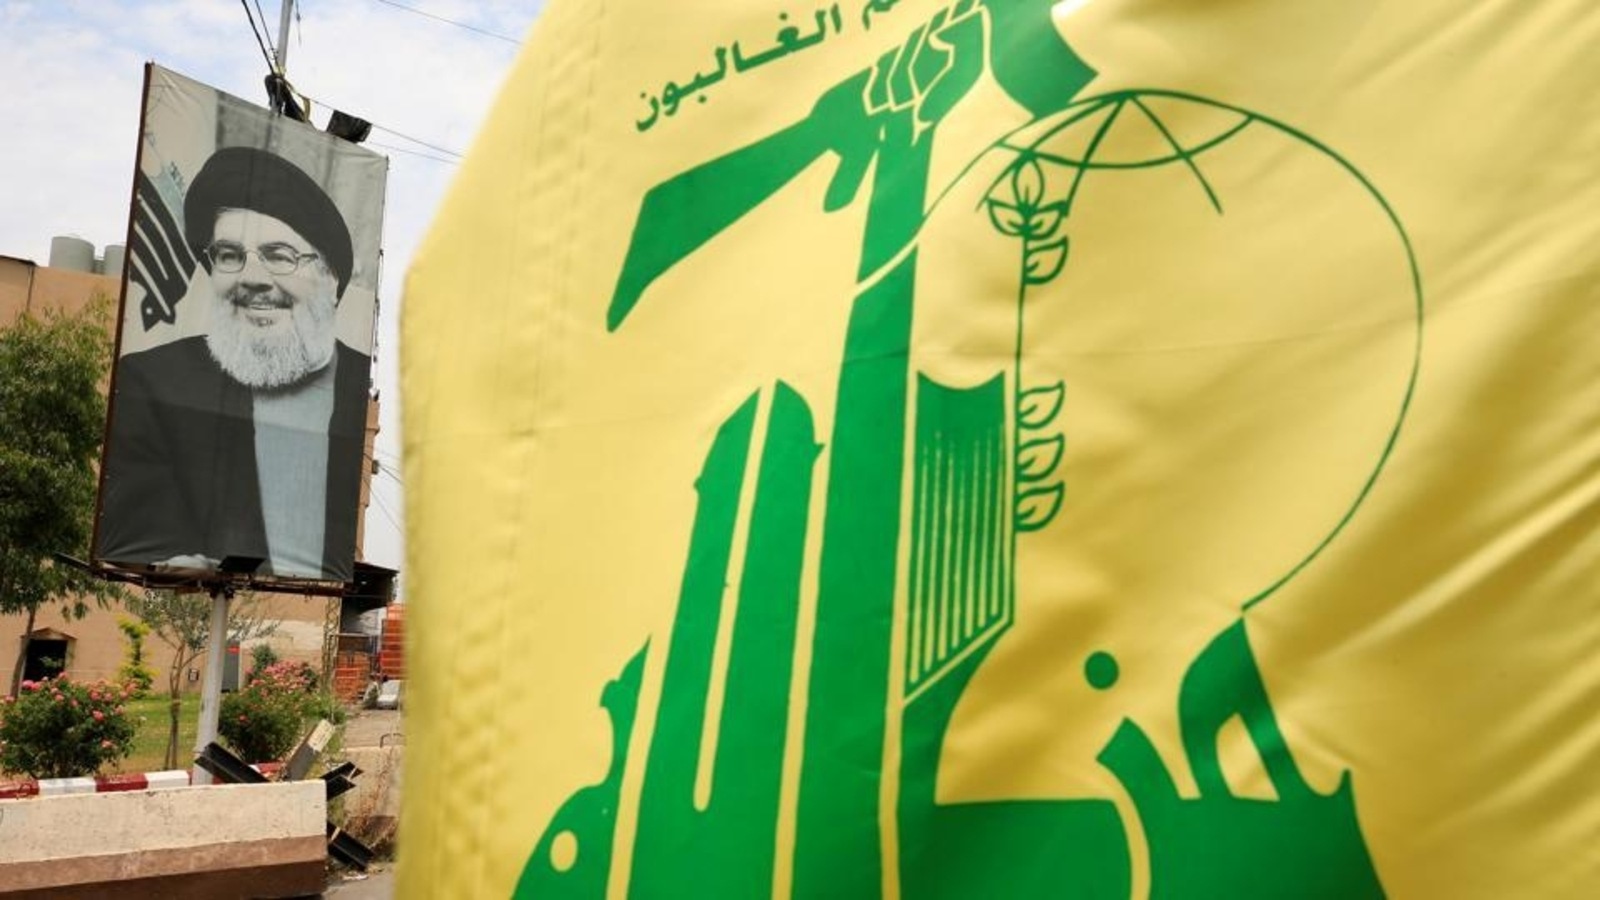 Hezbollah praises synagogue attack in east Jerusalem which killed 7